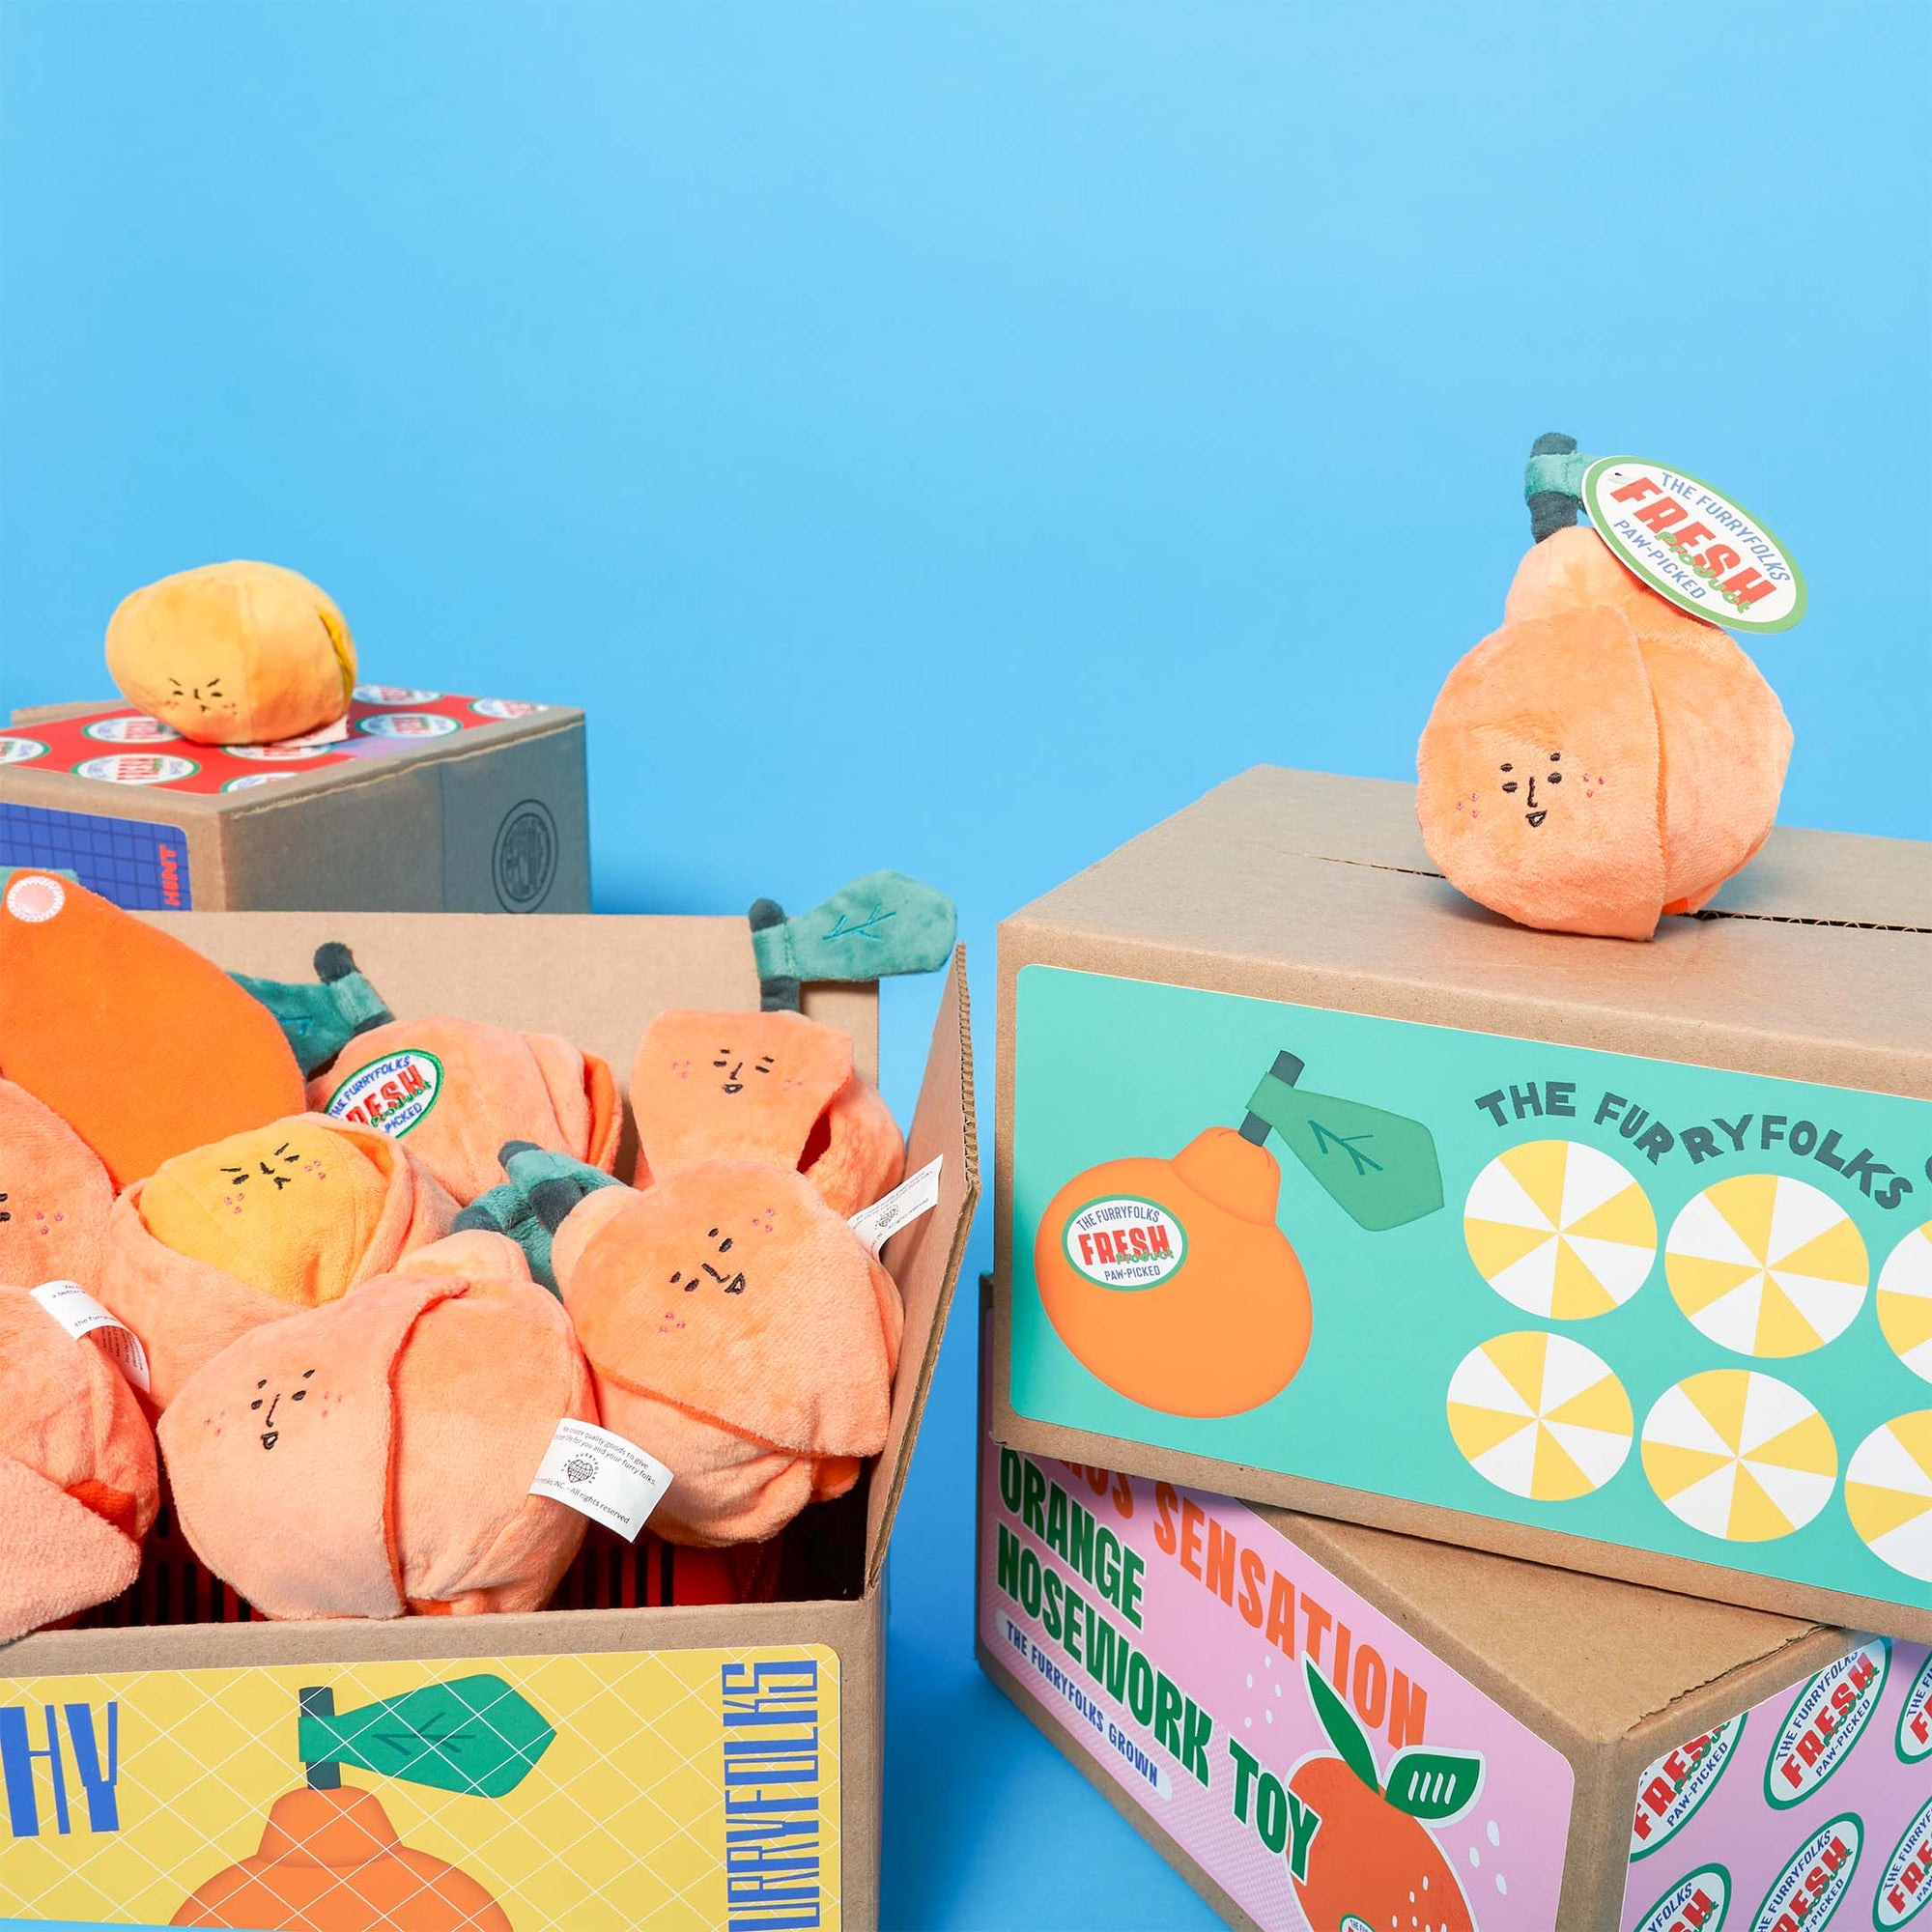 Cardboard boxes filled with orange-shaped dog toys are displayed against a blue background. One box has "Healthy" written on it, and another is labeled "Citrus Sensation Orange Nosework Toy by The Furryfolks Grown," indicating a focus on playful, healthy pet products.